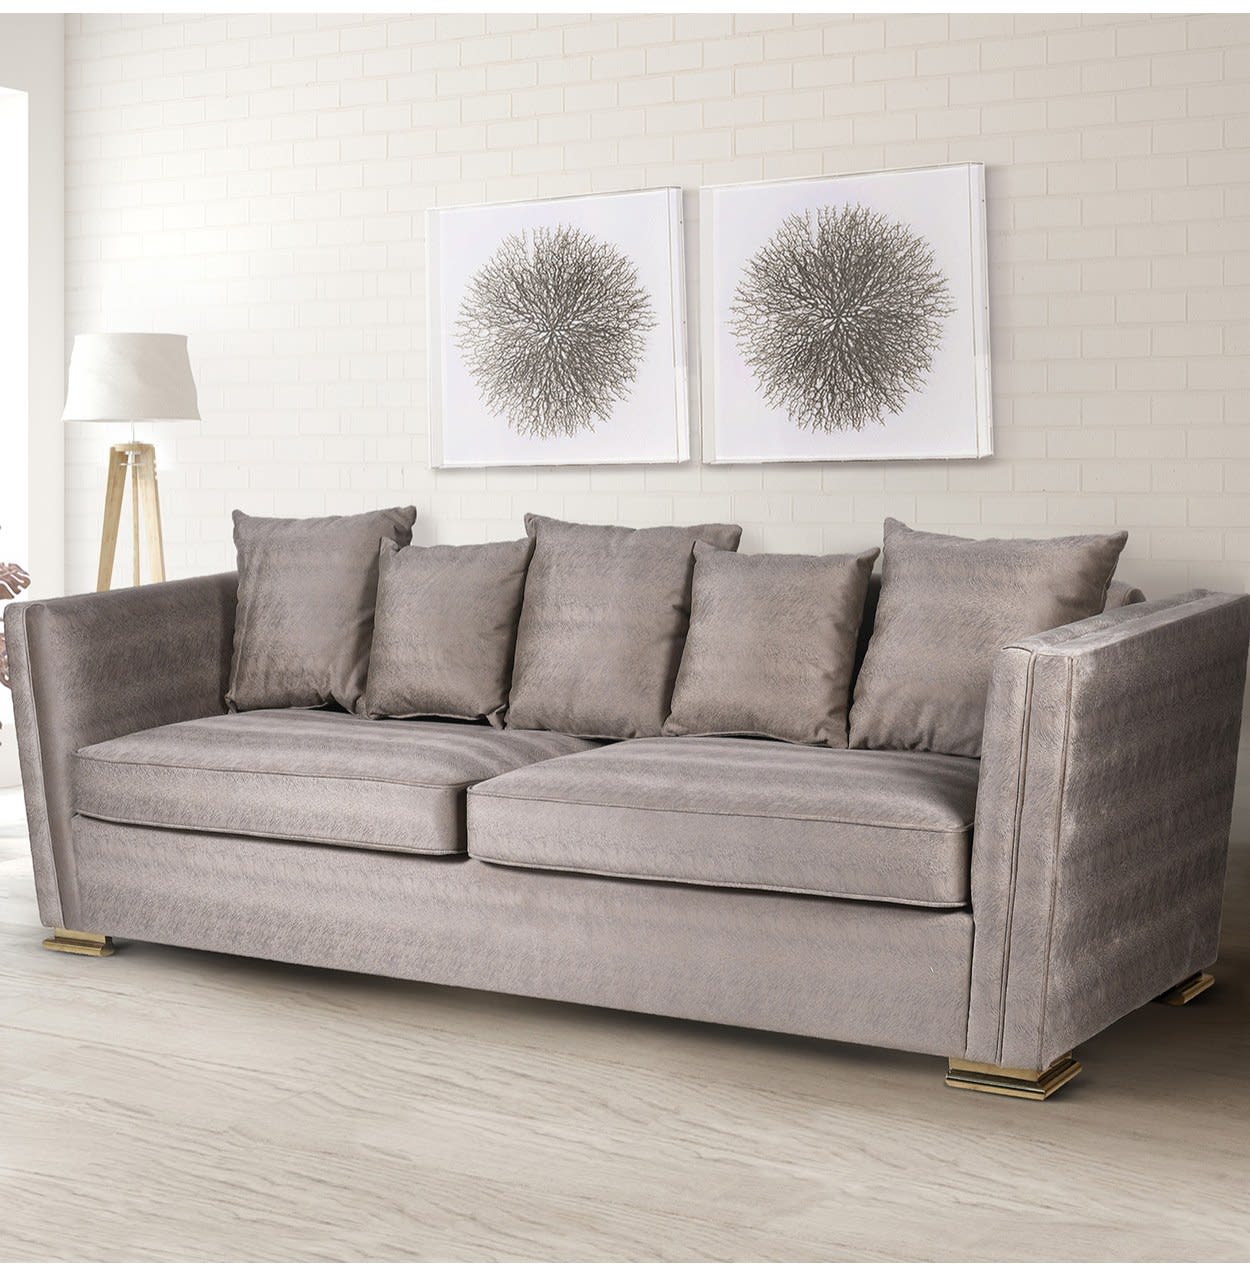 Taupe Beige 3 Seater Fabric Sofa with Gold Feet